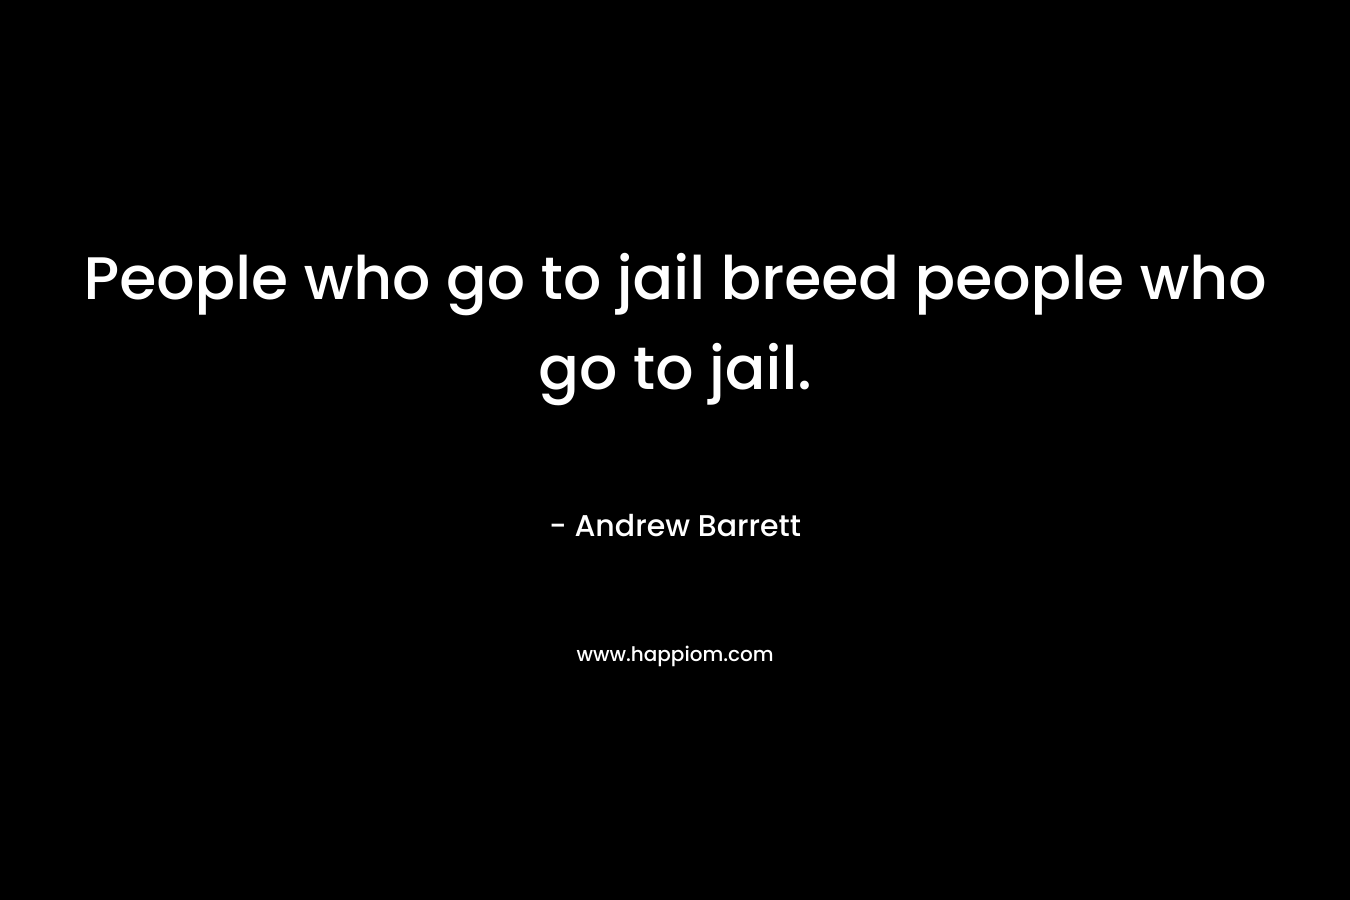 People who go to jail breed people who go to jail. – Andrew Barrett